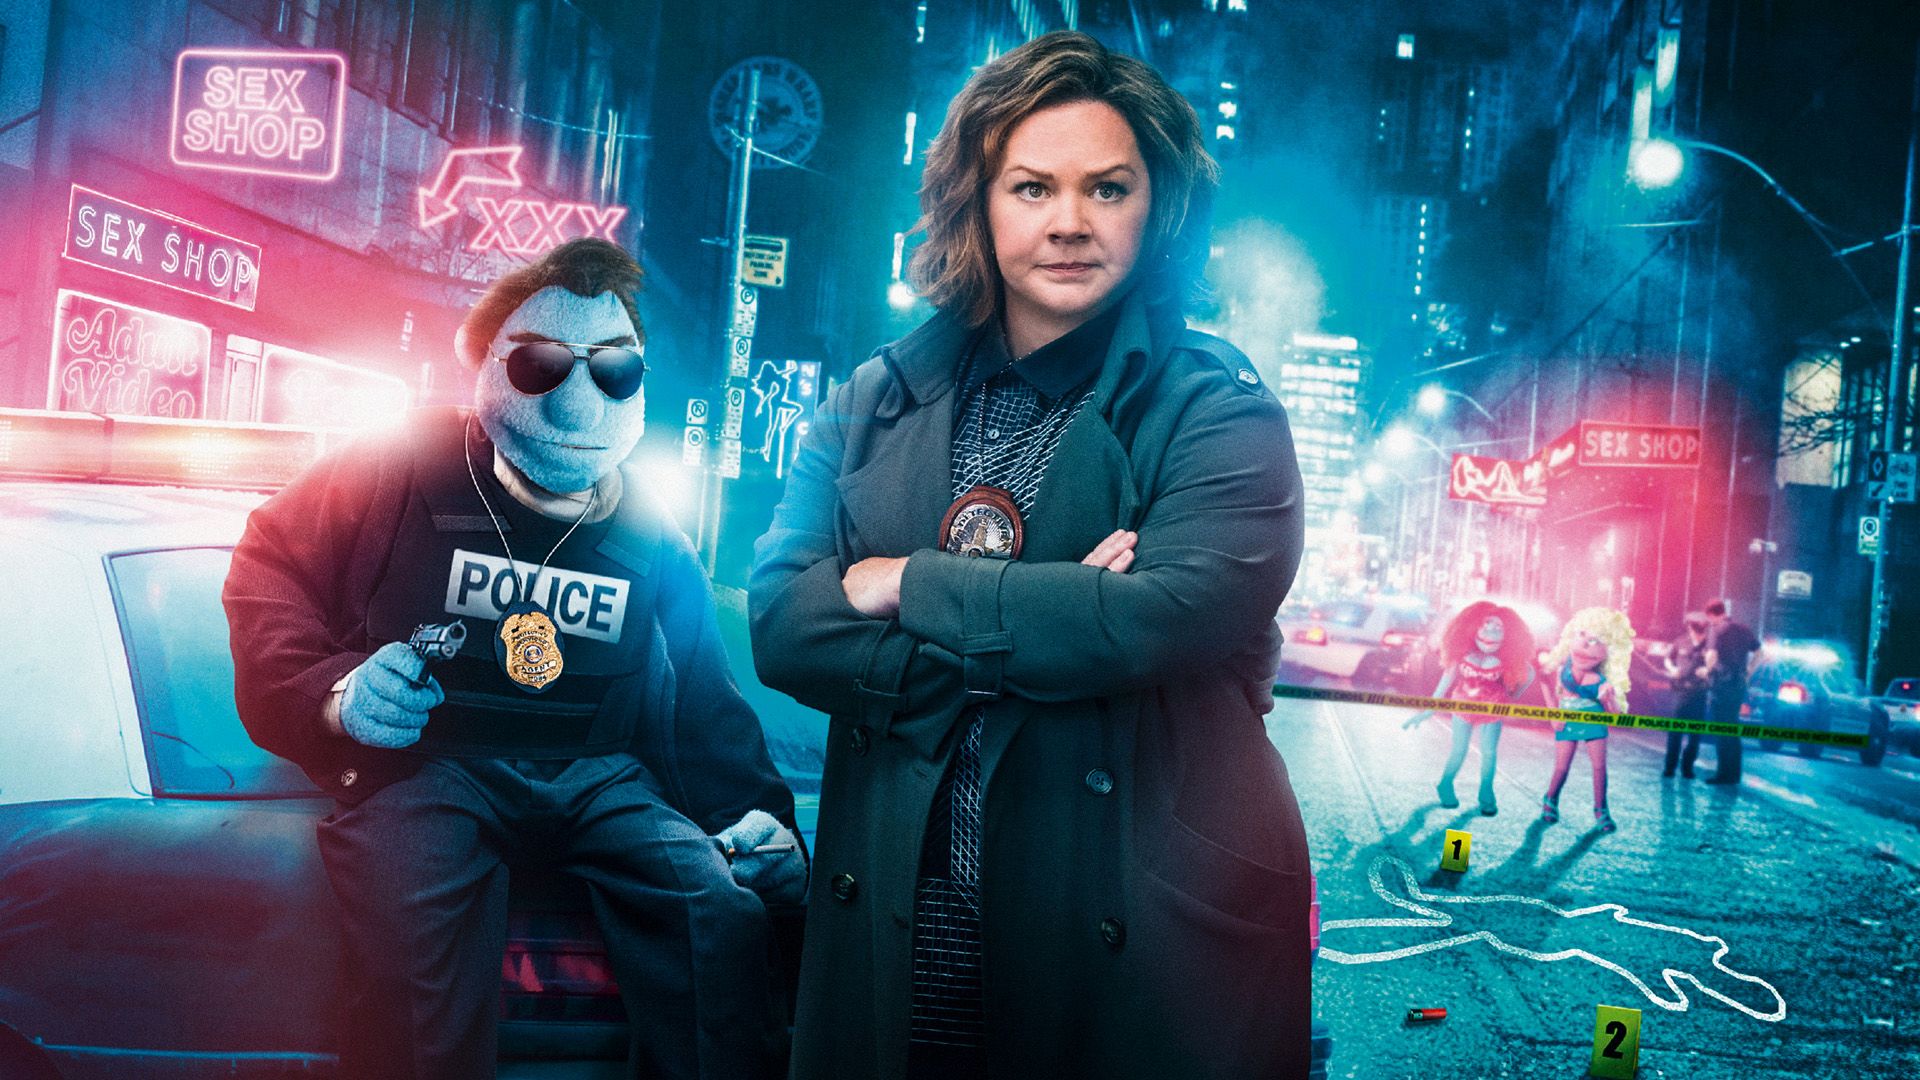 The Happytime Murders background